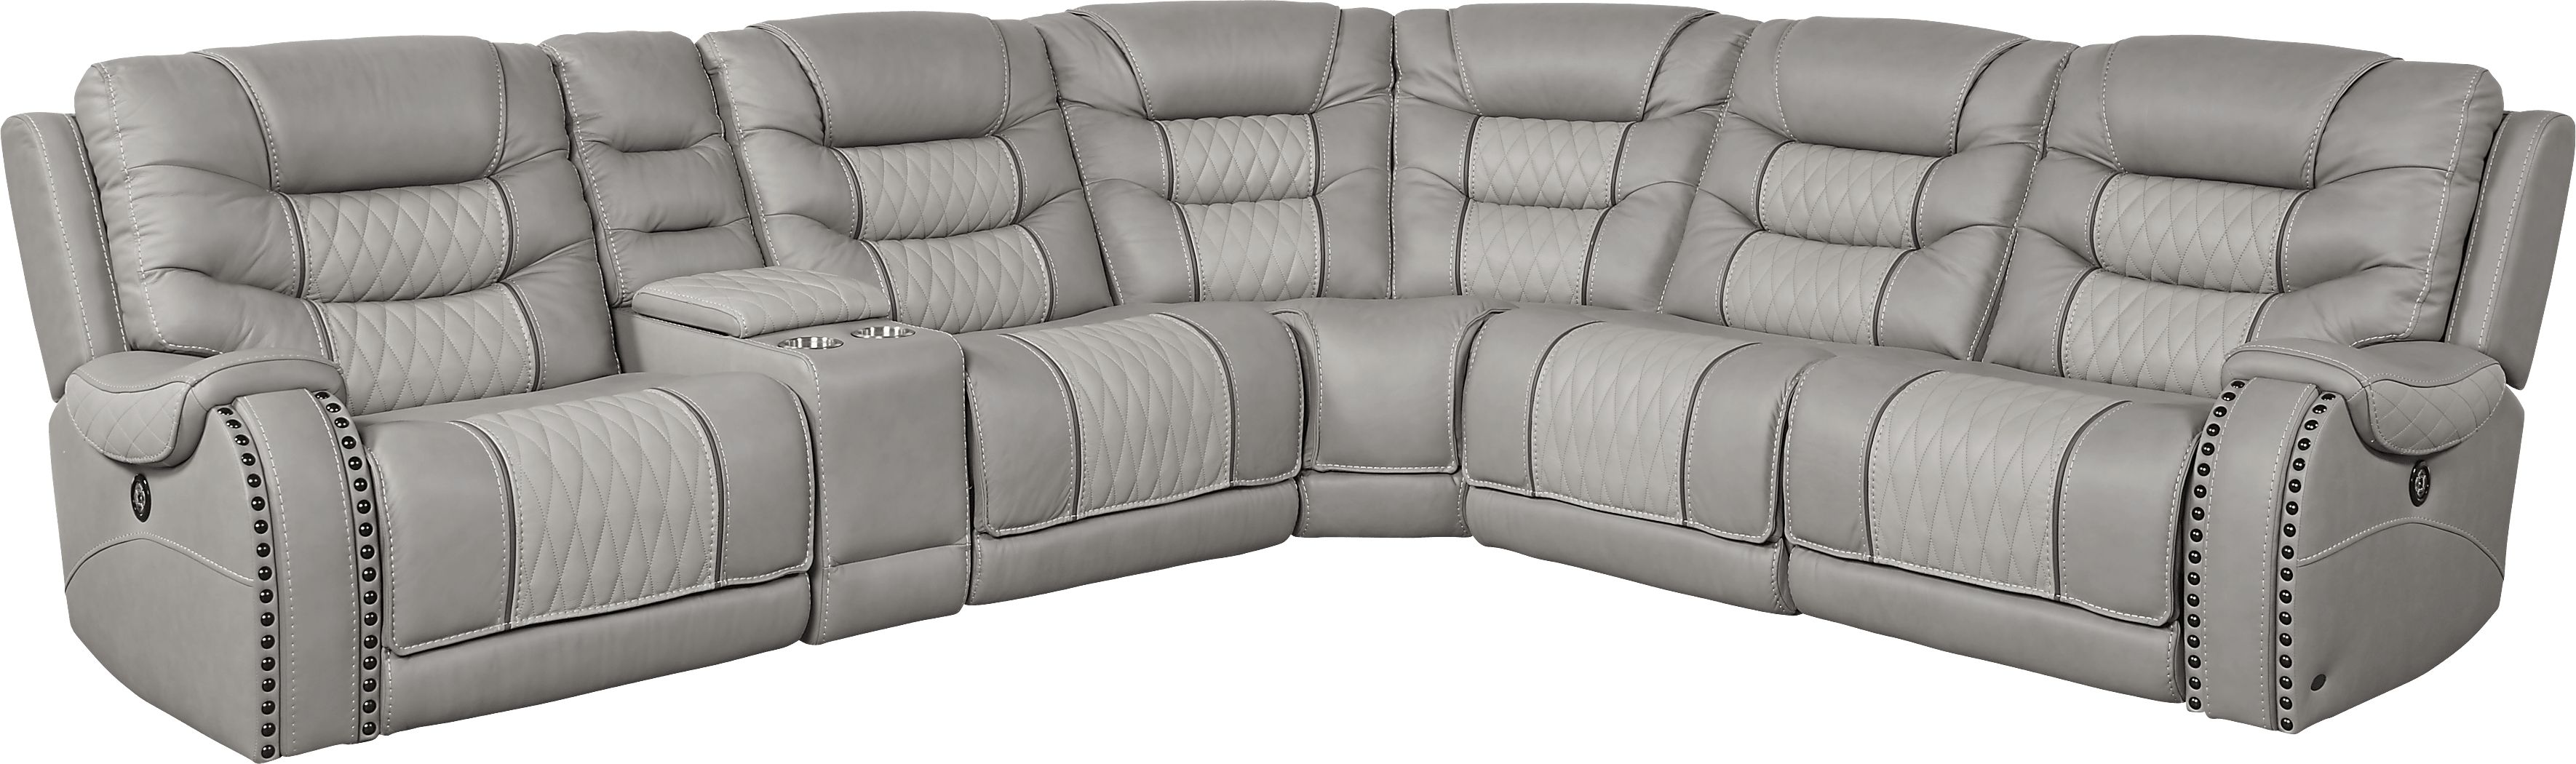 Eric Church Highway To Home Headliner Gray Leather 9 Pc Dual Power Reclining Sectional Living Room